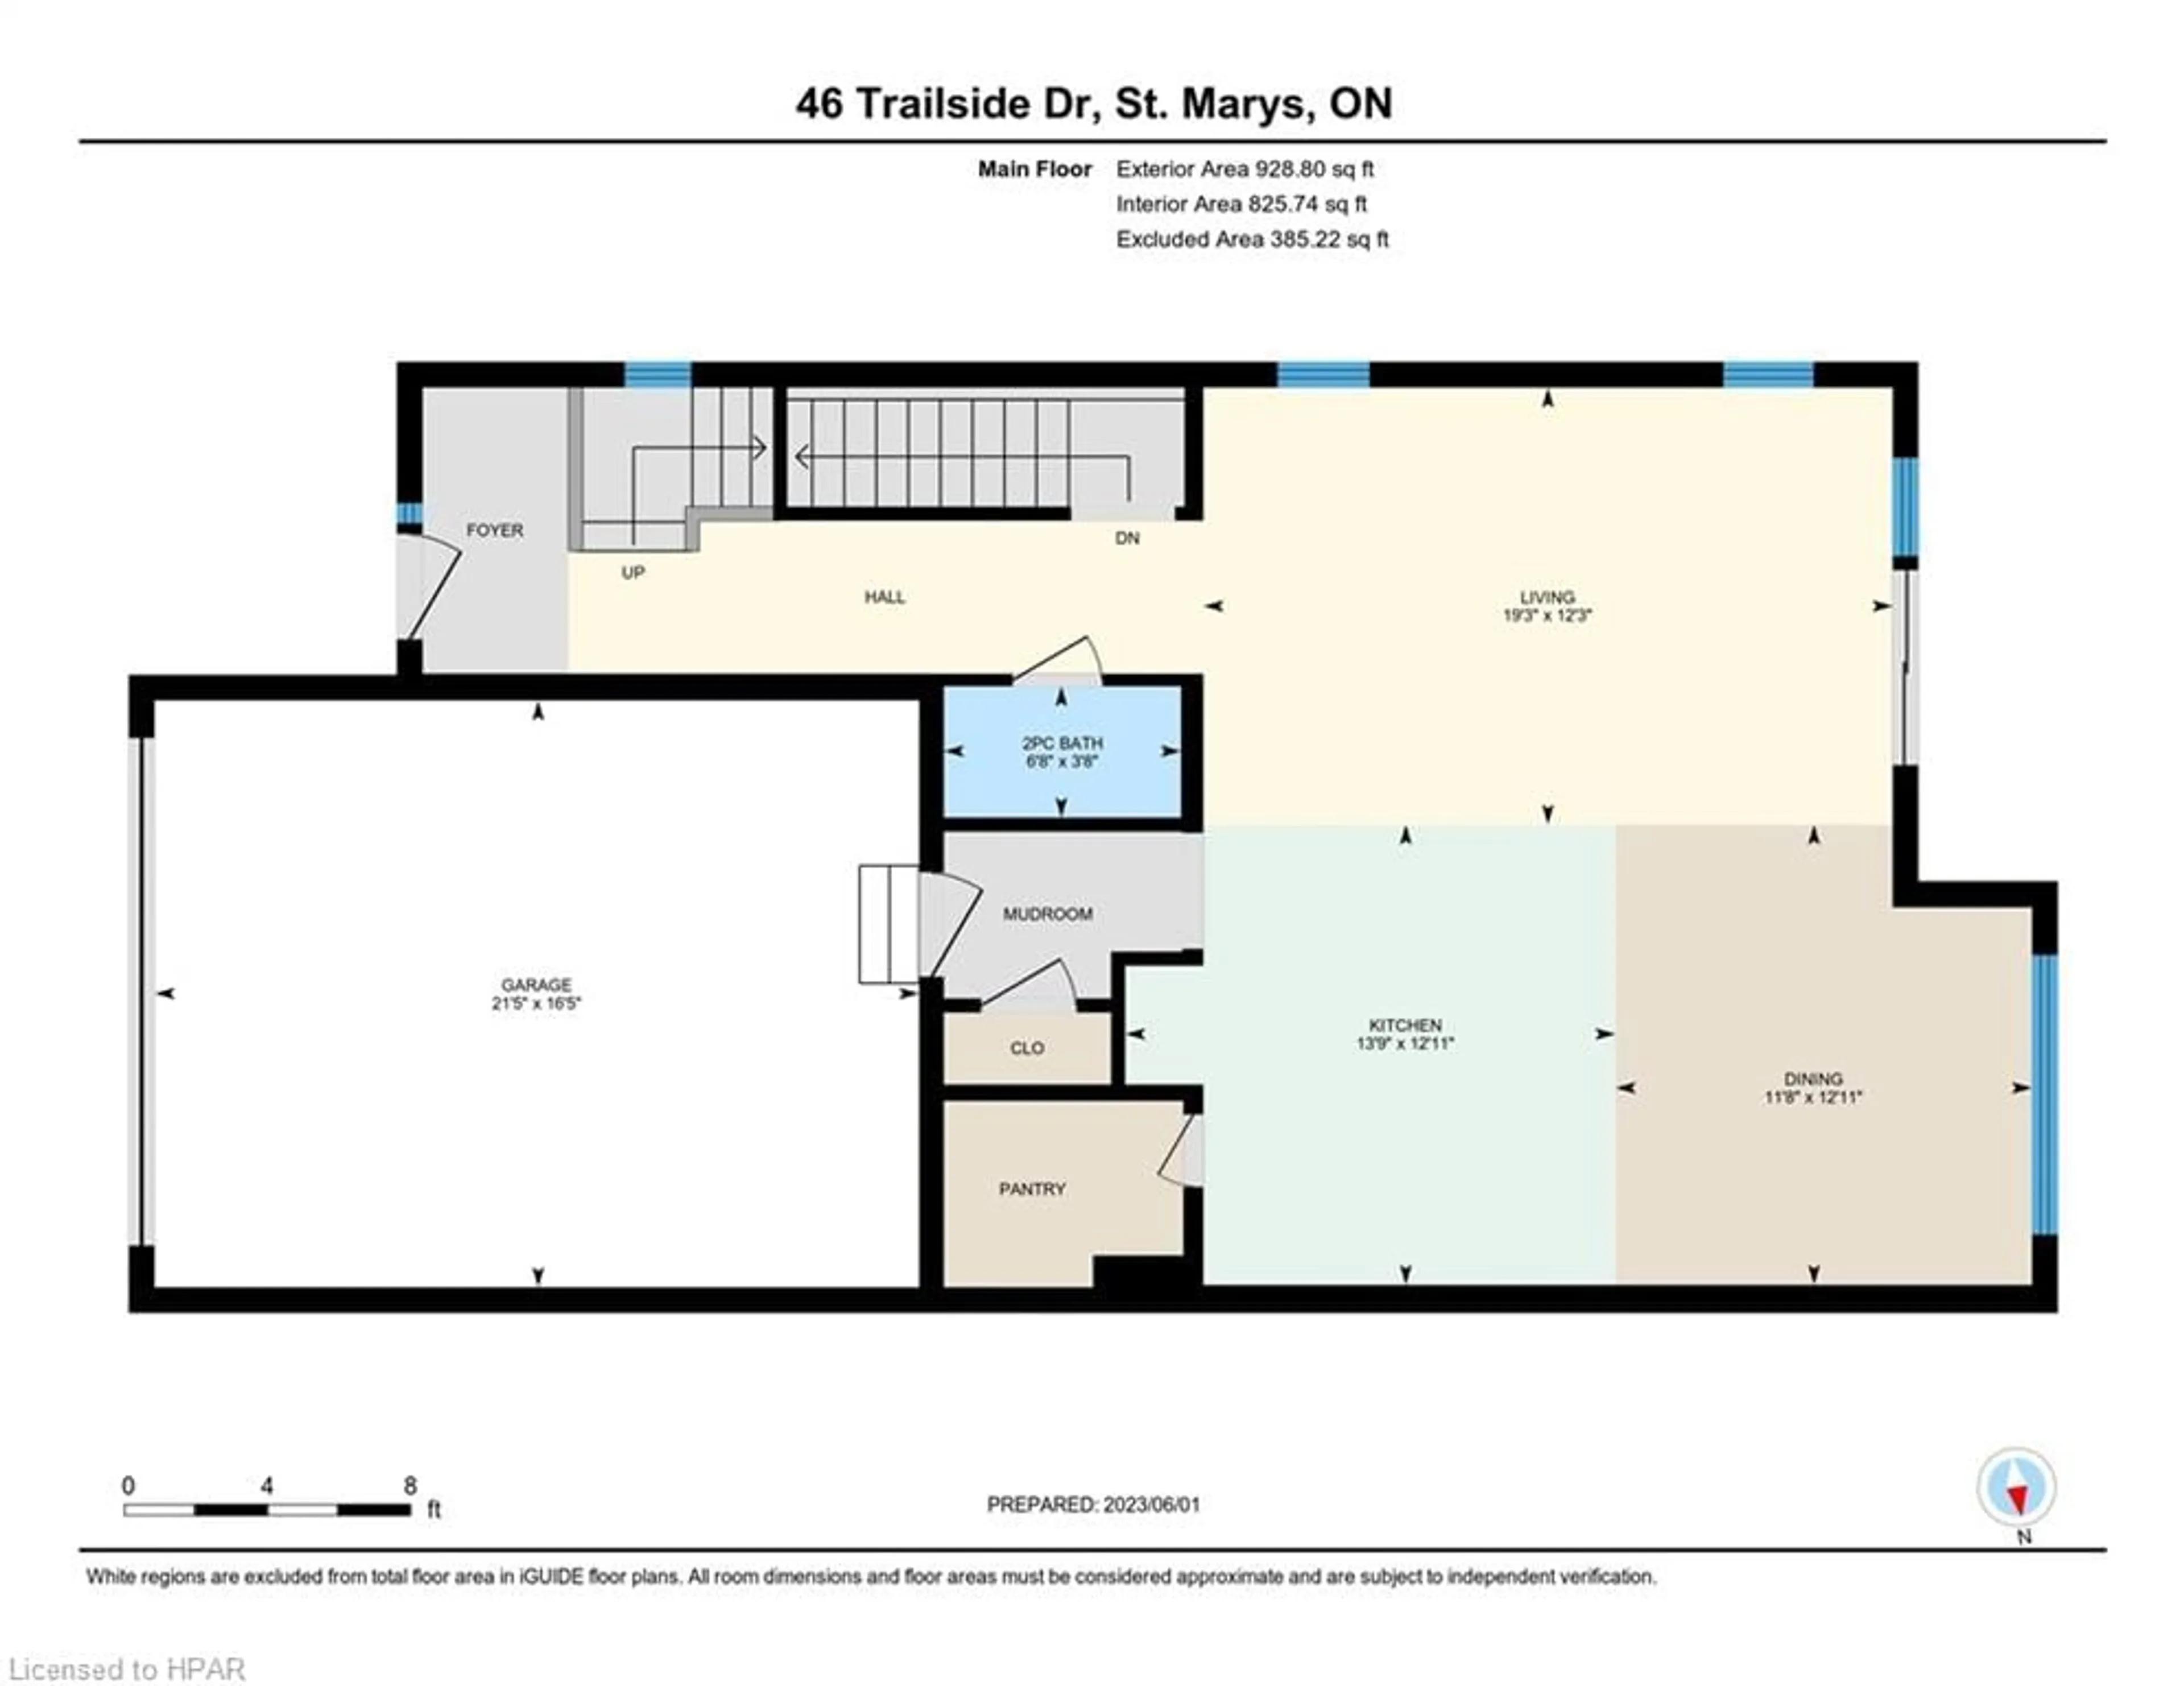 Floor plan for 46 Trail Side Dr, St. Marys Ontario N4X 1C4